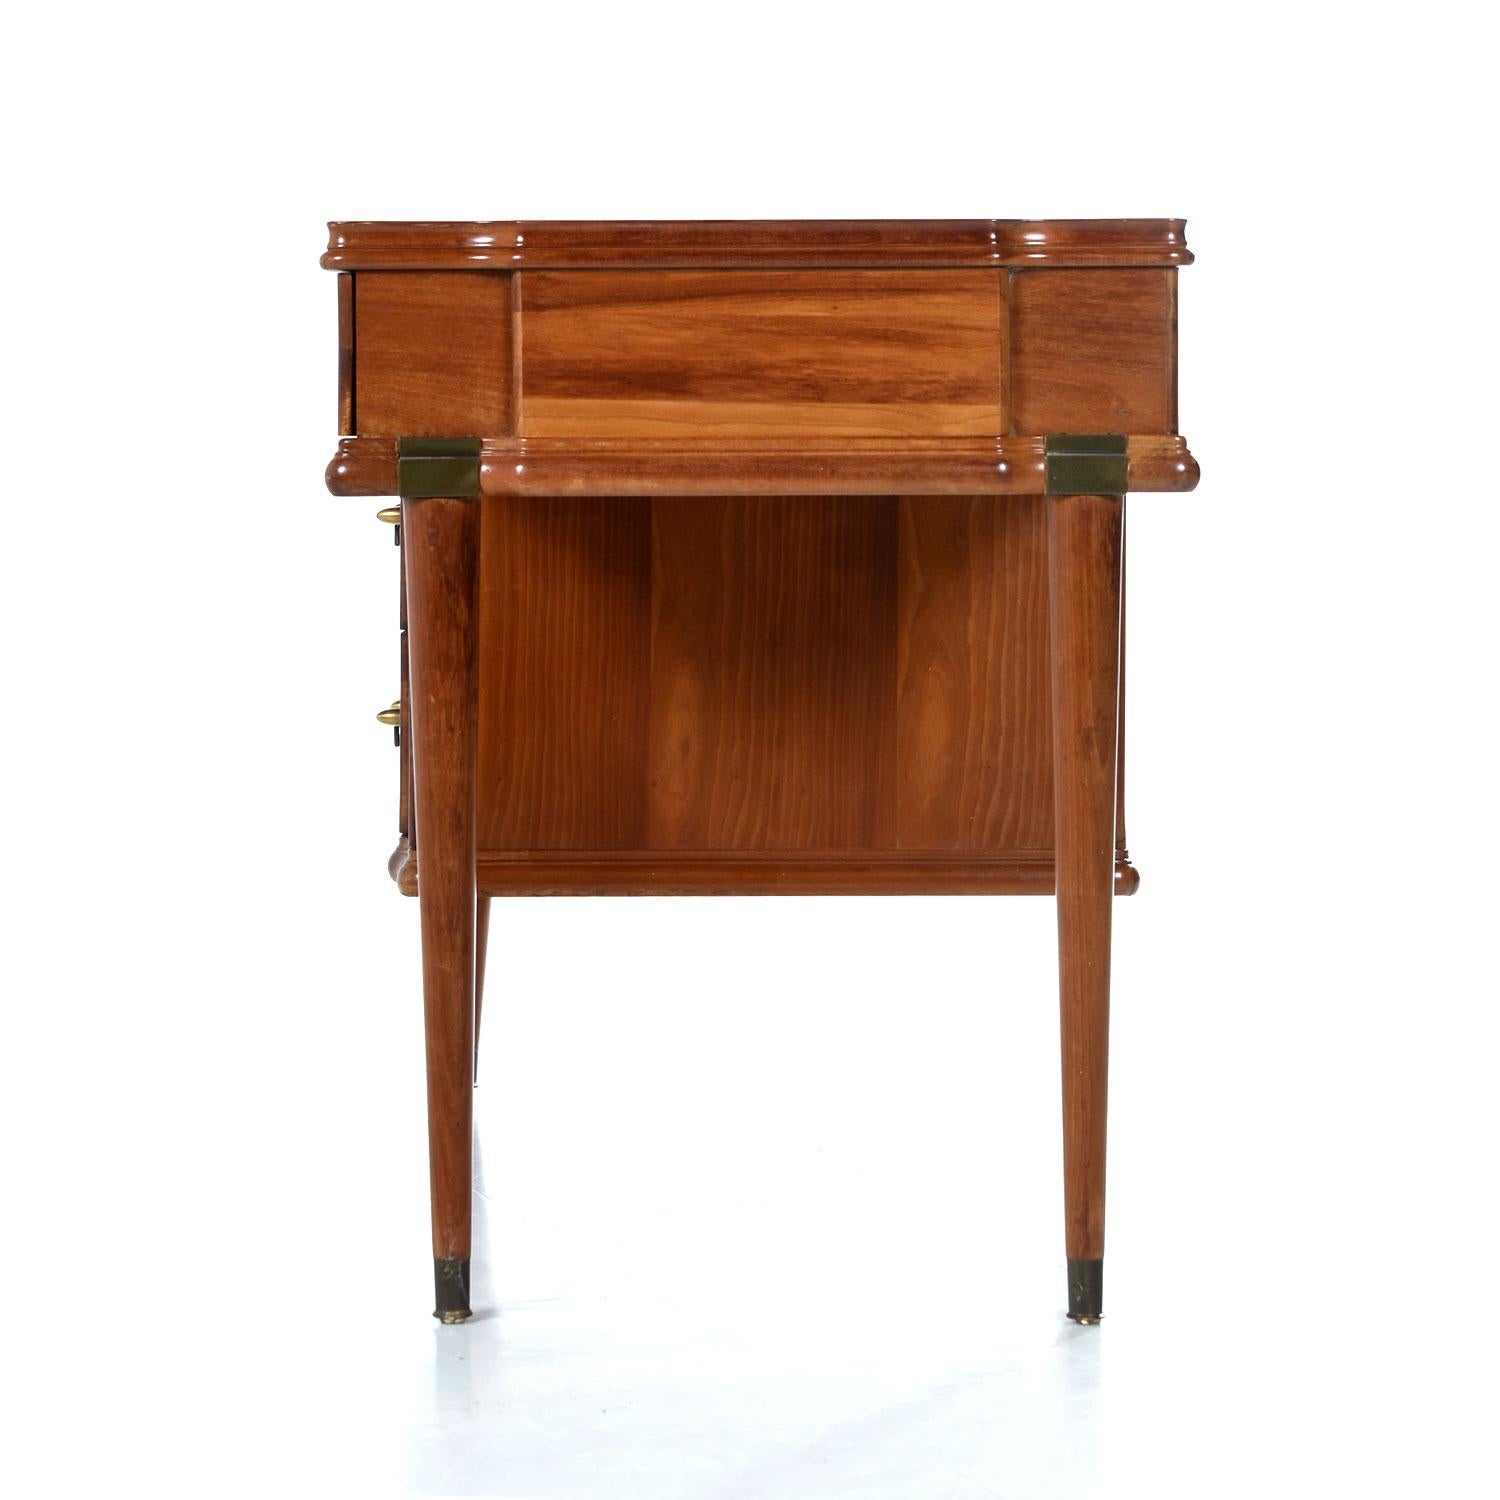 Machine Age Cherry Desk with Brass Accents by Hickory MFG 1